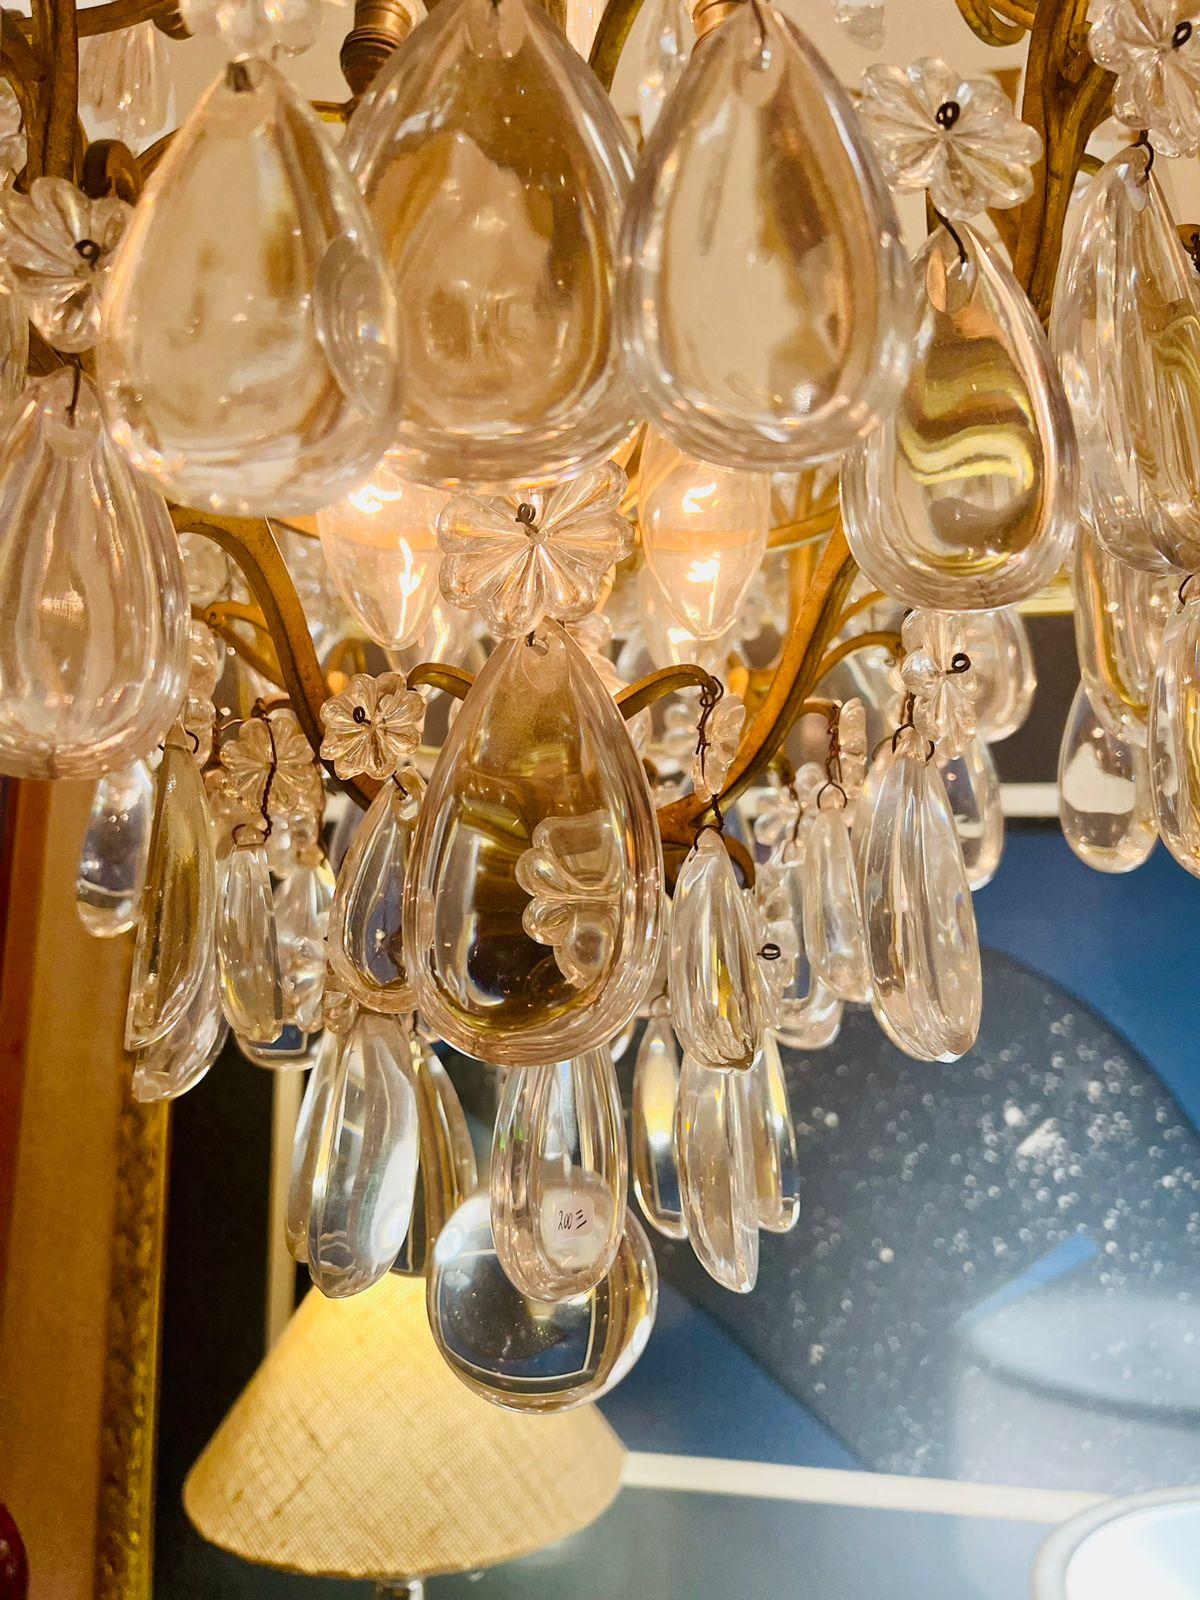 Incredible Maison Jansen chandelier in rock cristal, glass and metal circa 1930 with drops and flowers.